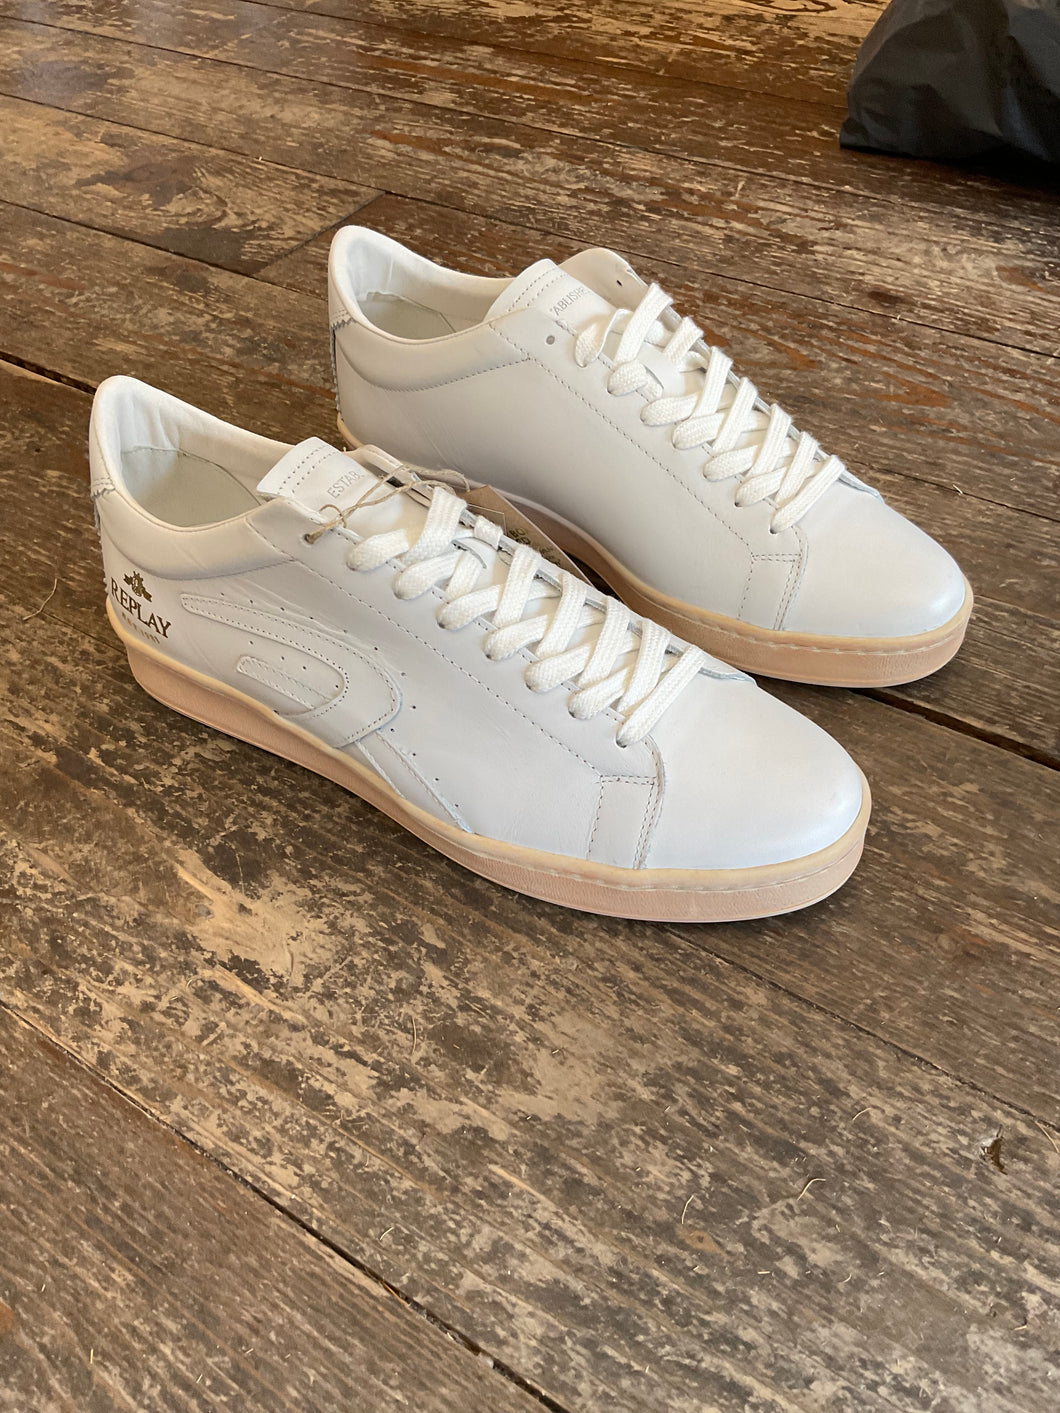 Replay Newtown White Sneakers